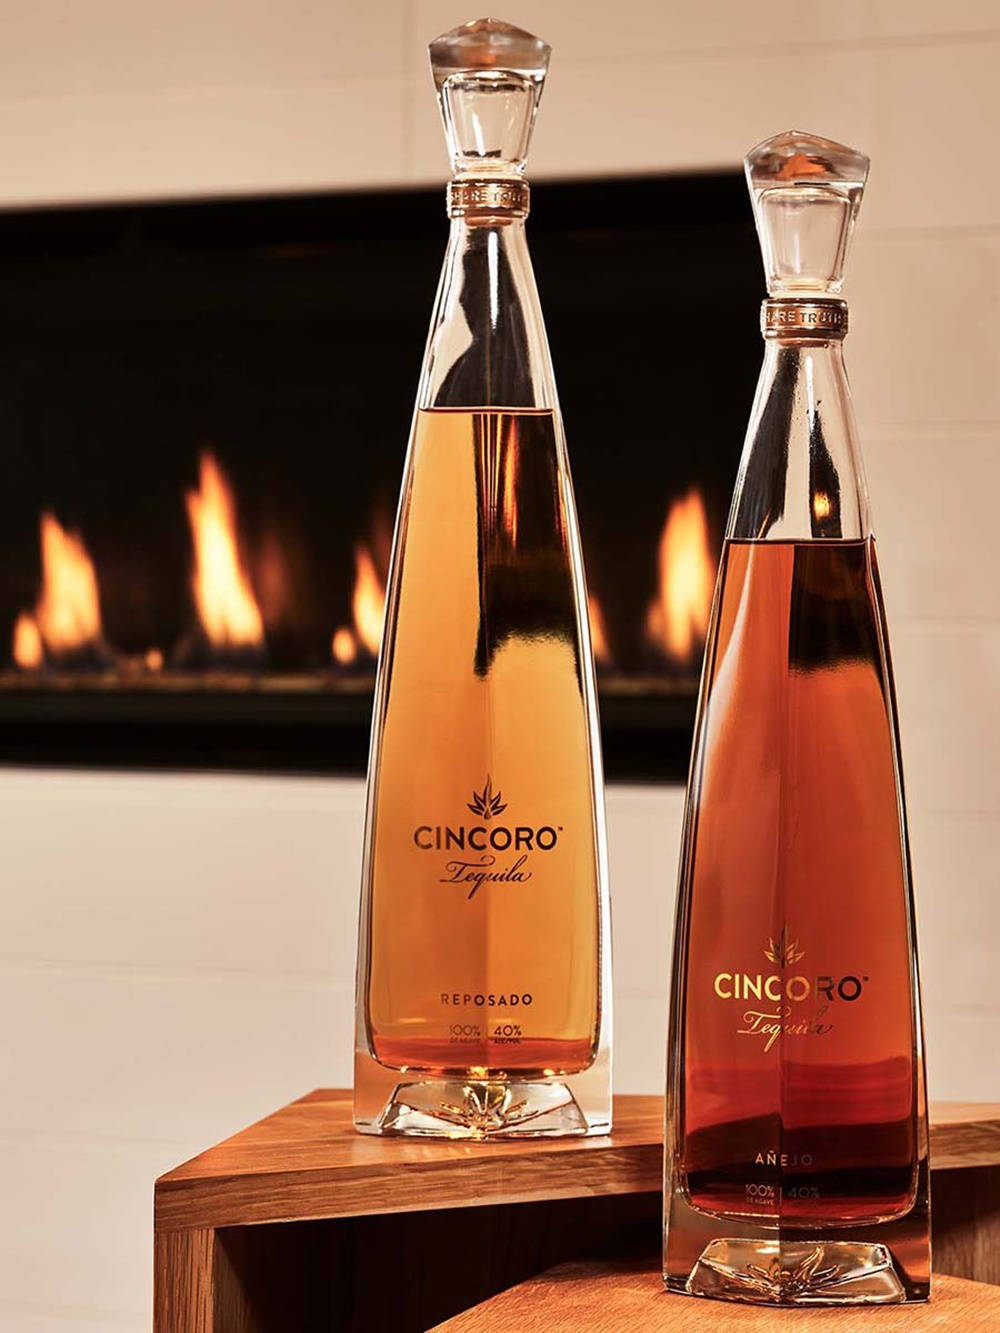 Cincoro Tequila Reposado And Añejo With Fire Display On TV Wallpaper